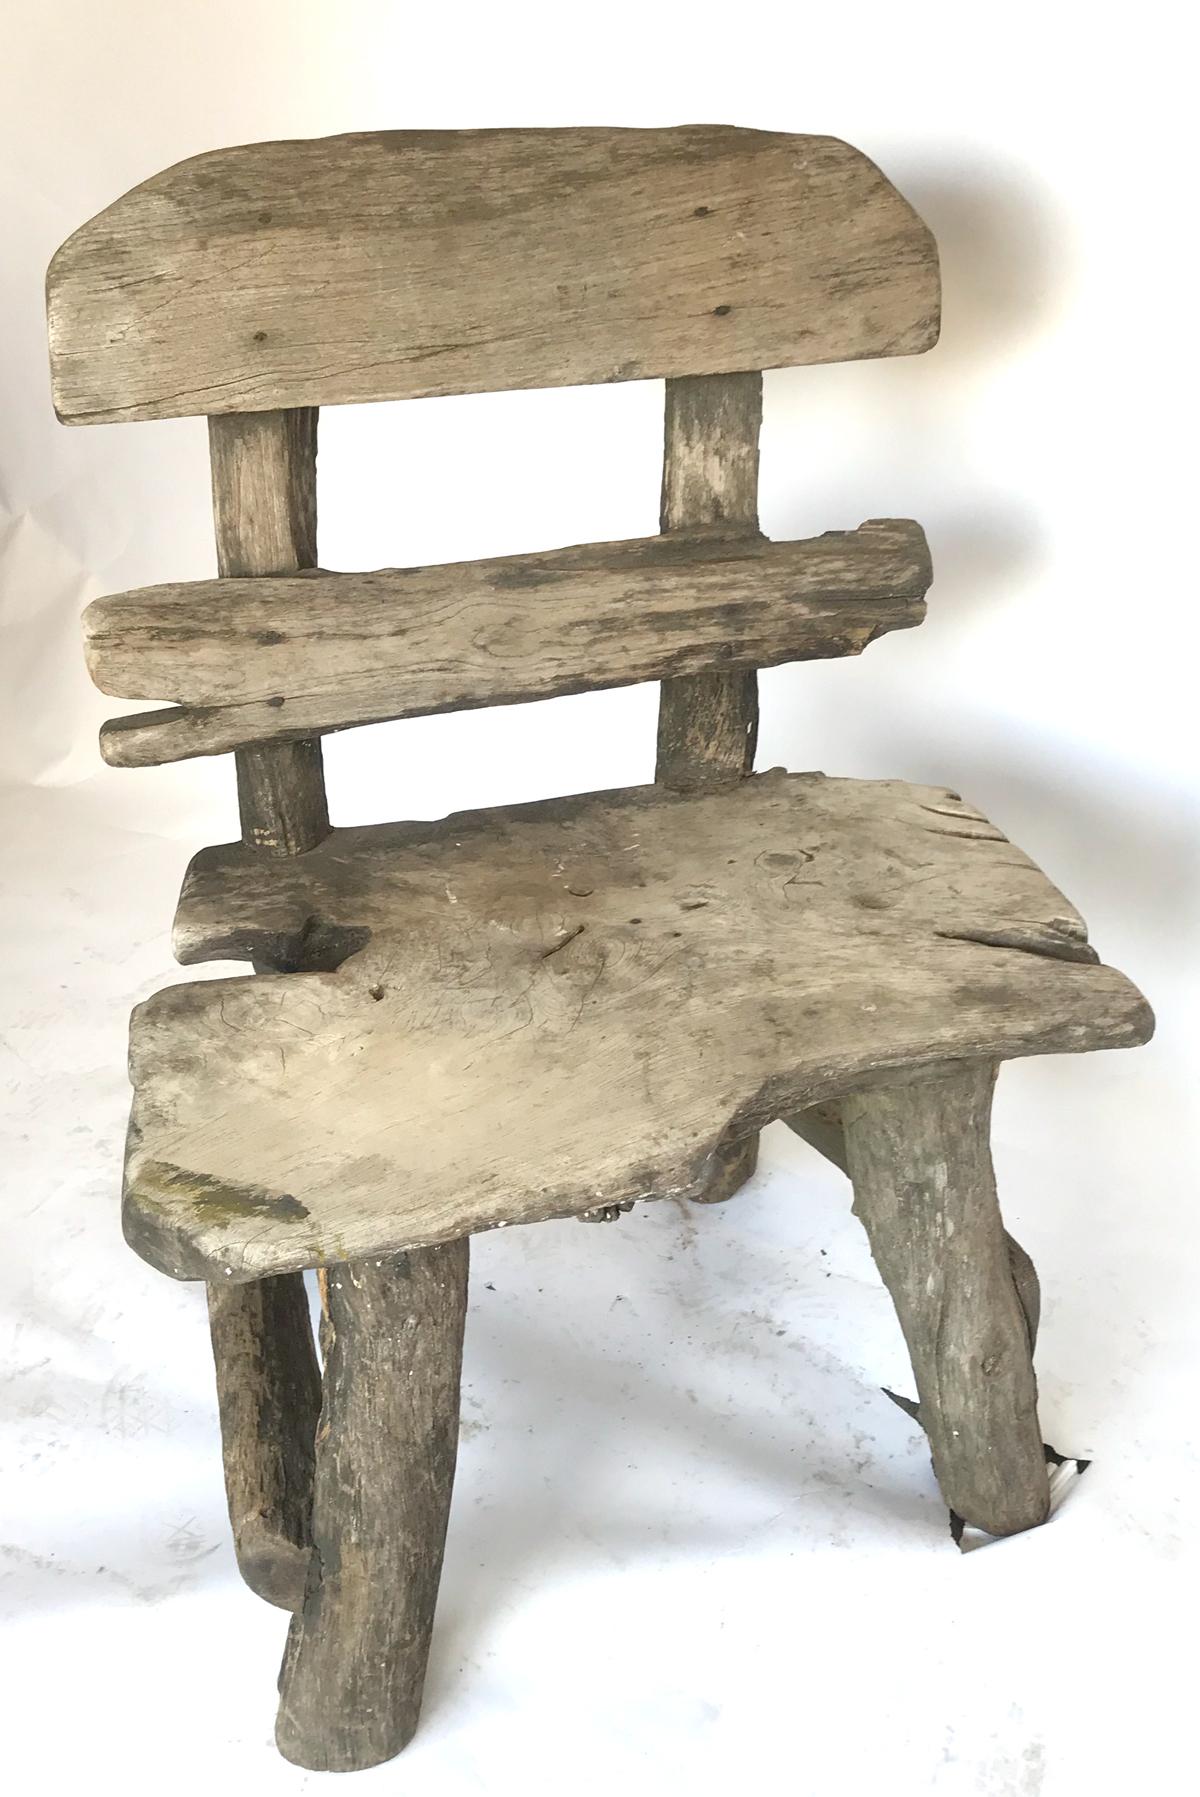 Vintage weathered oak garden chair. Great look, super sturdy. Would look great in a garden setting!